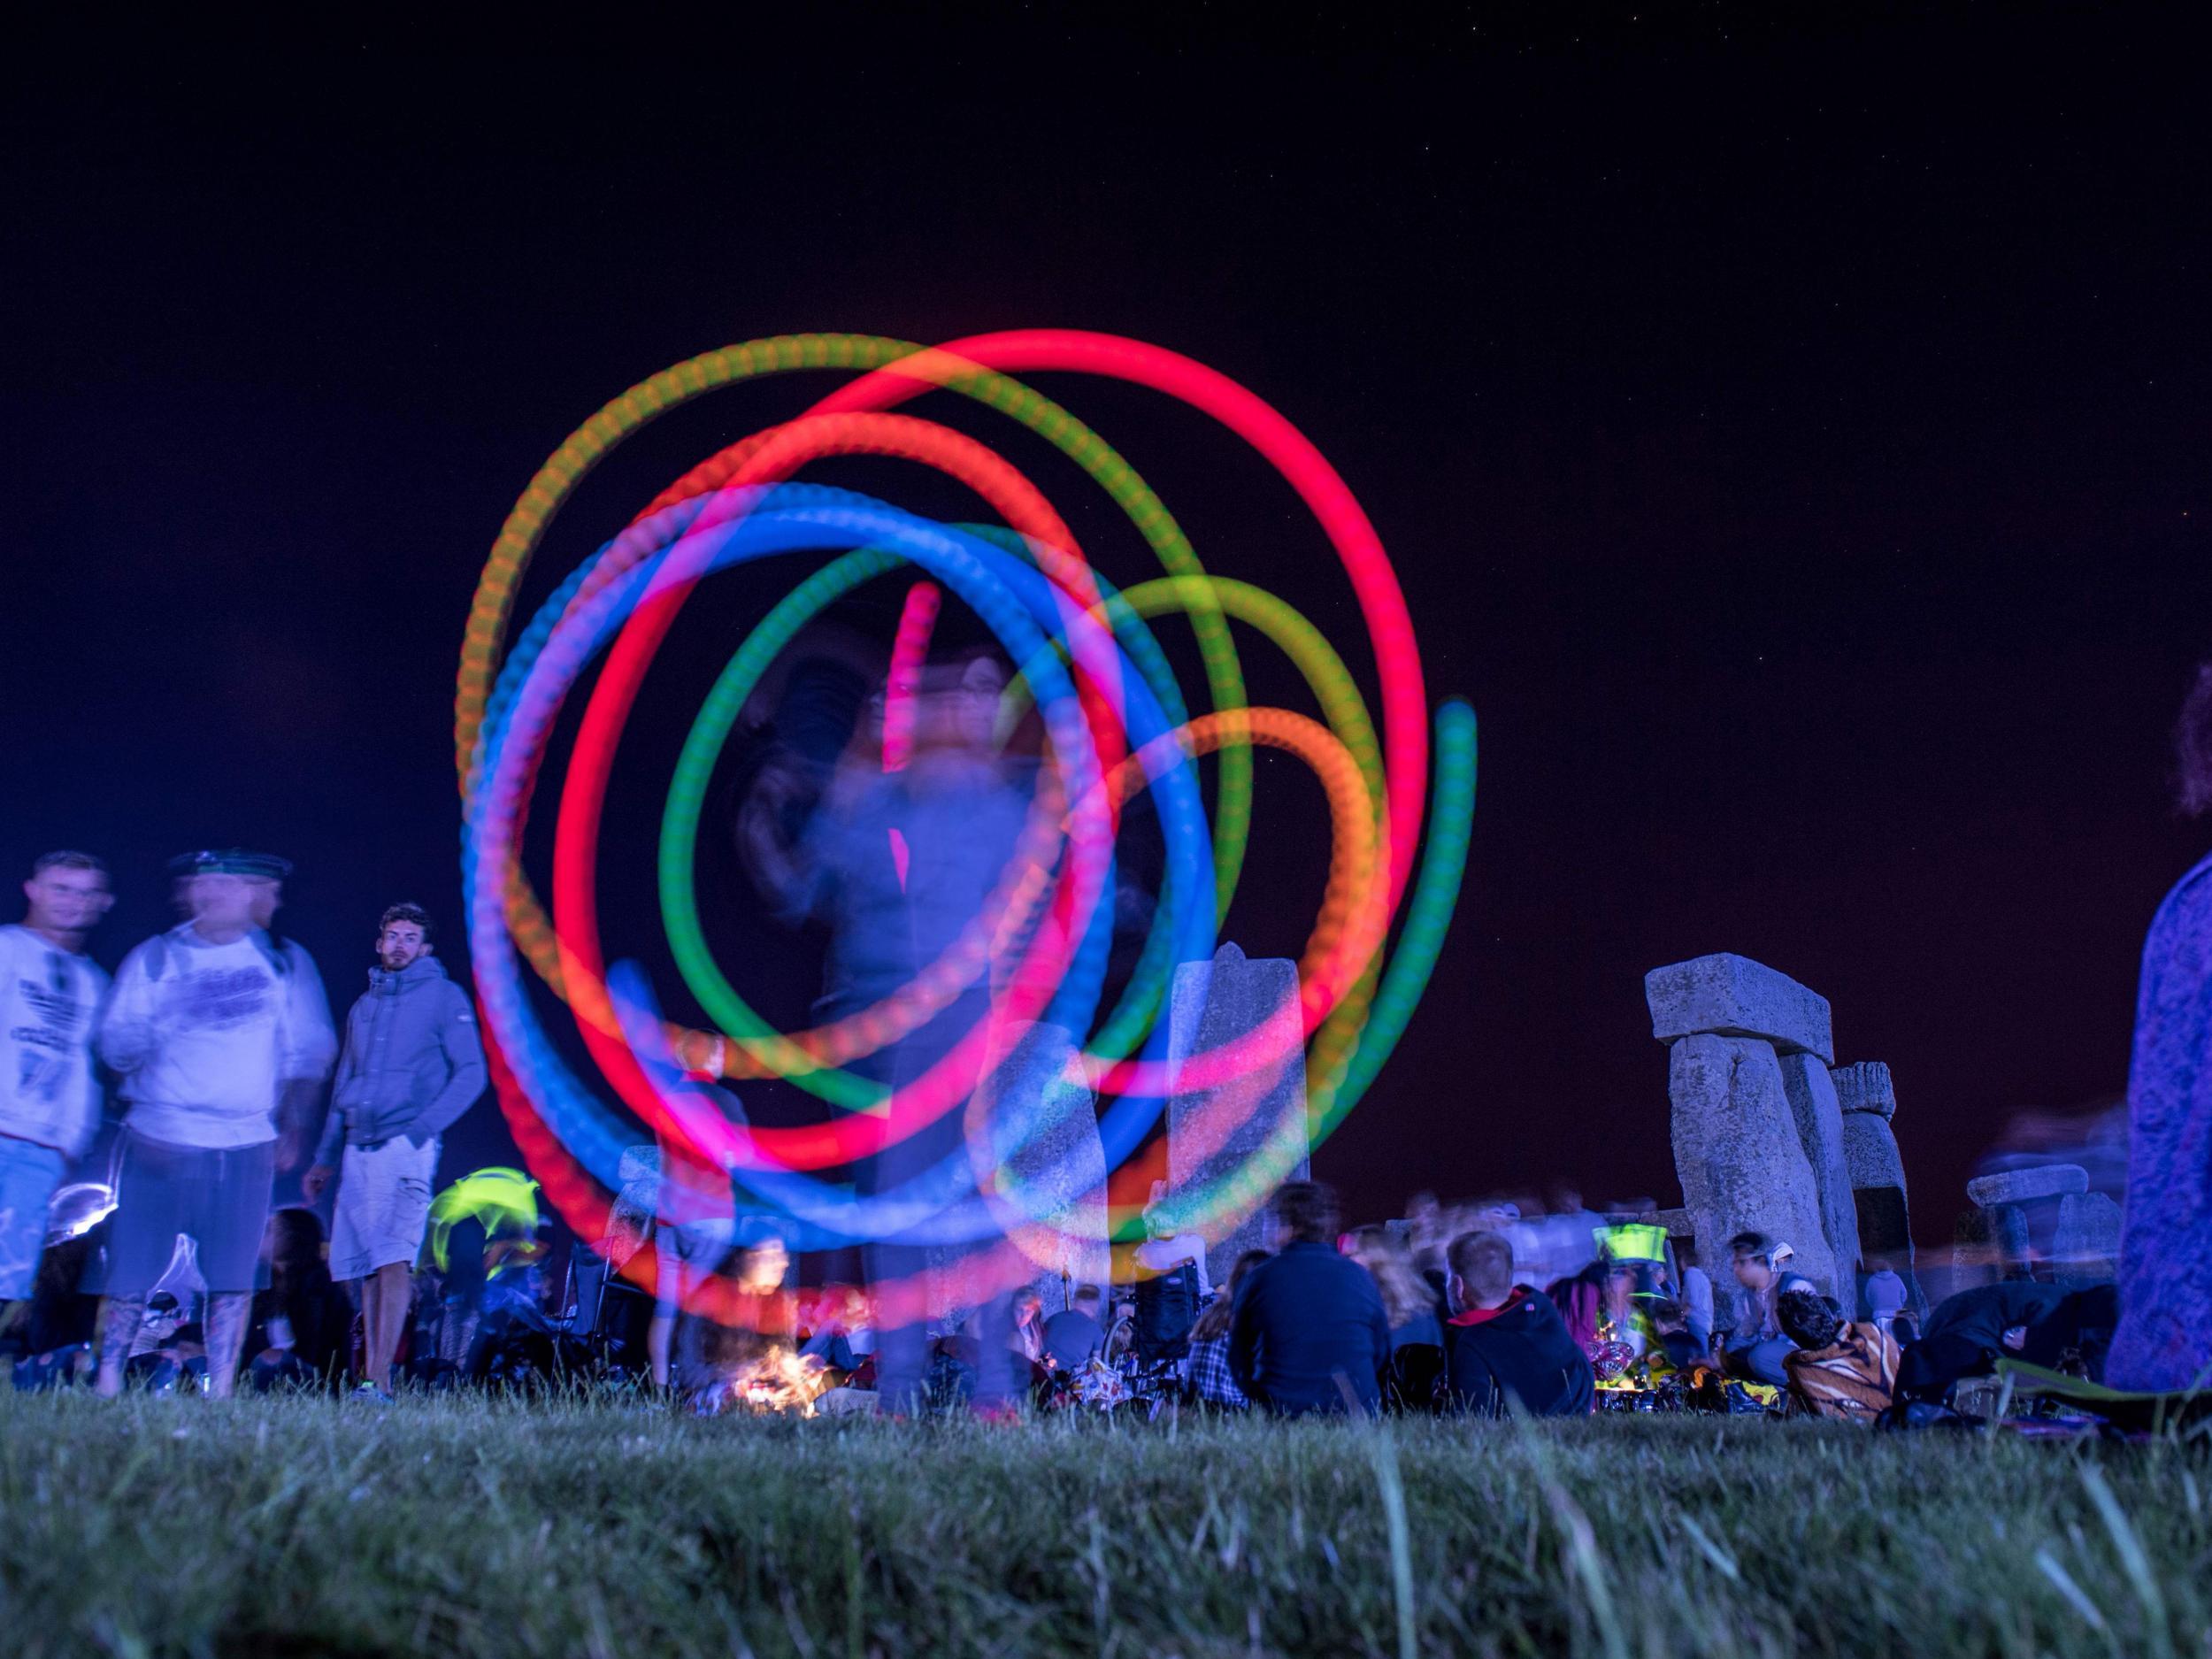 A reveller spins glow sticks as people gather to celebrate the pagan festival of Summer Solstice at Stonehenge